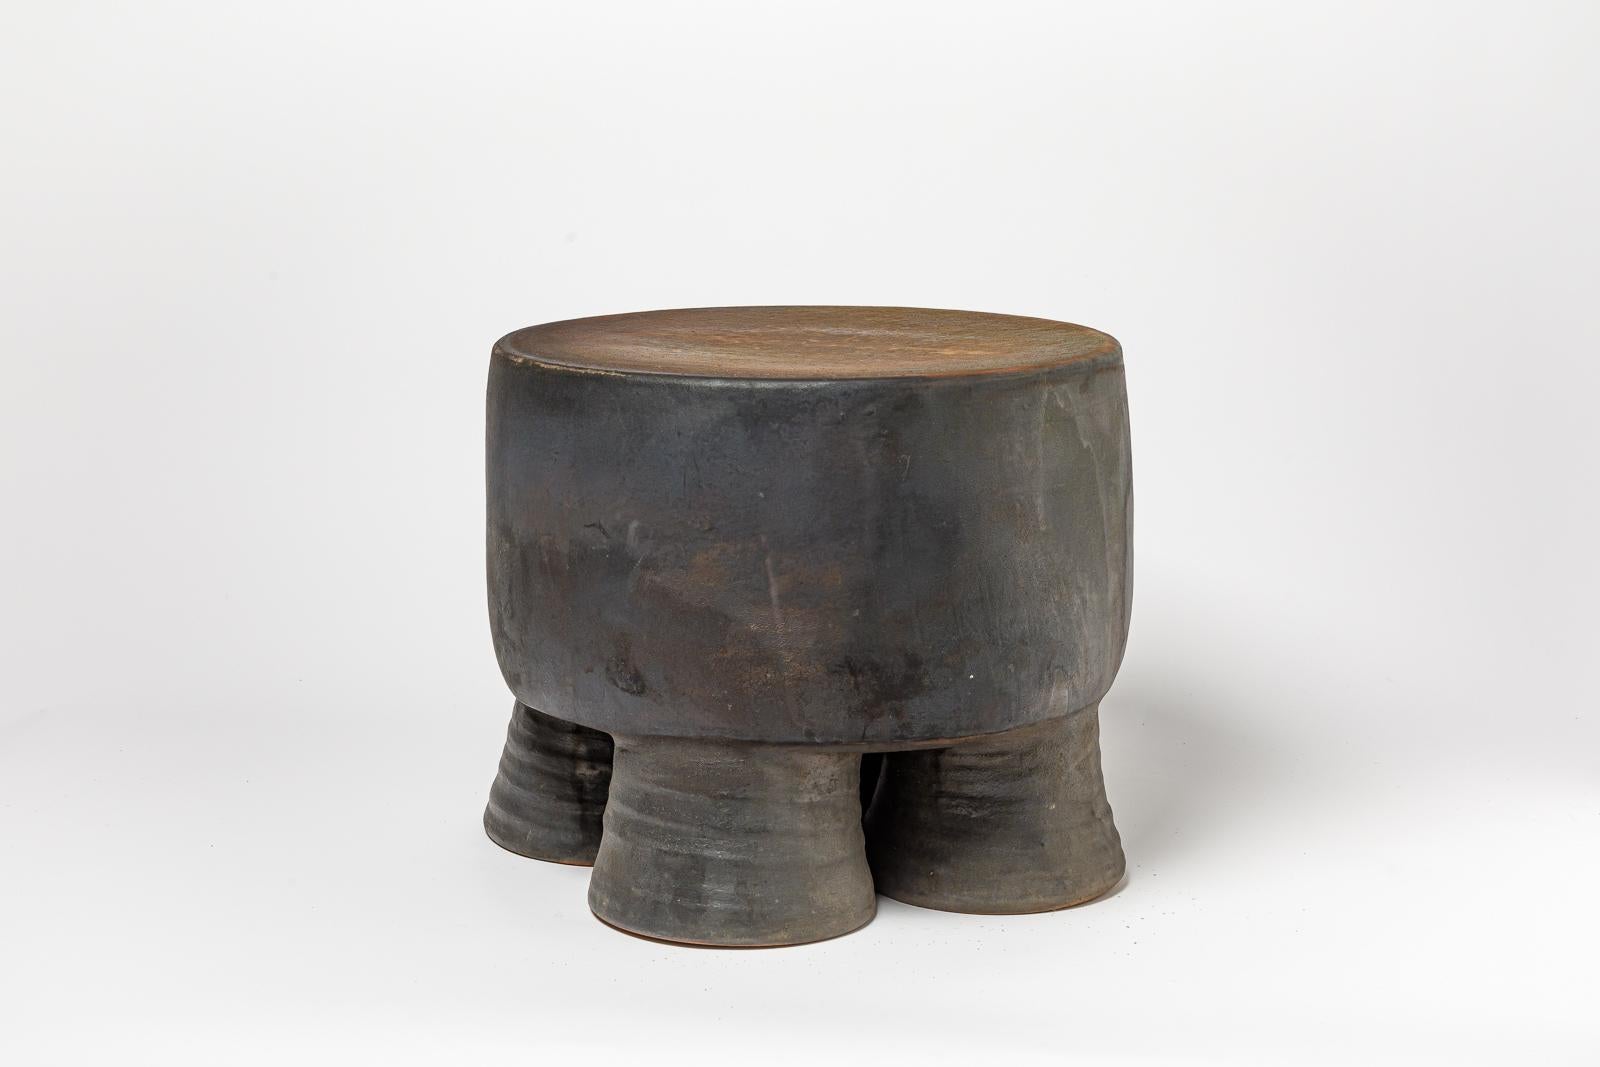 French Black and ocher glazed ceramic stool or coffee table by Mia Jensen, 2023. For Sale